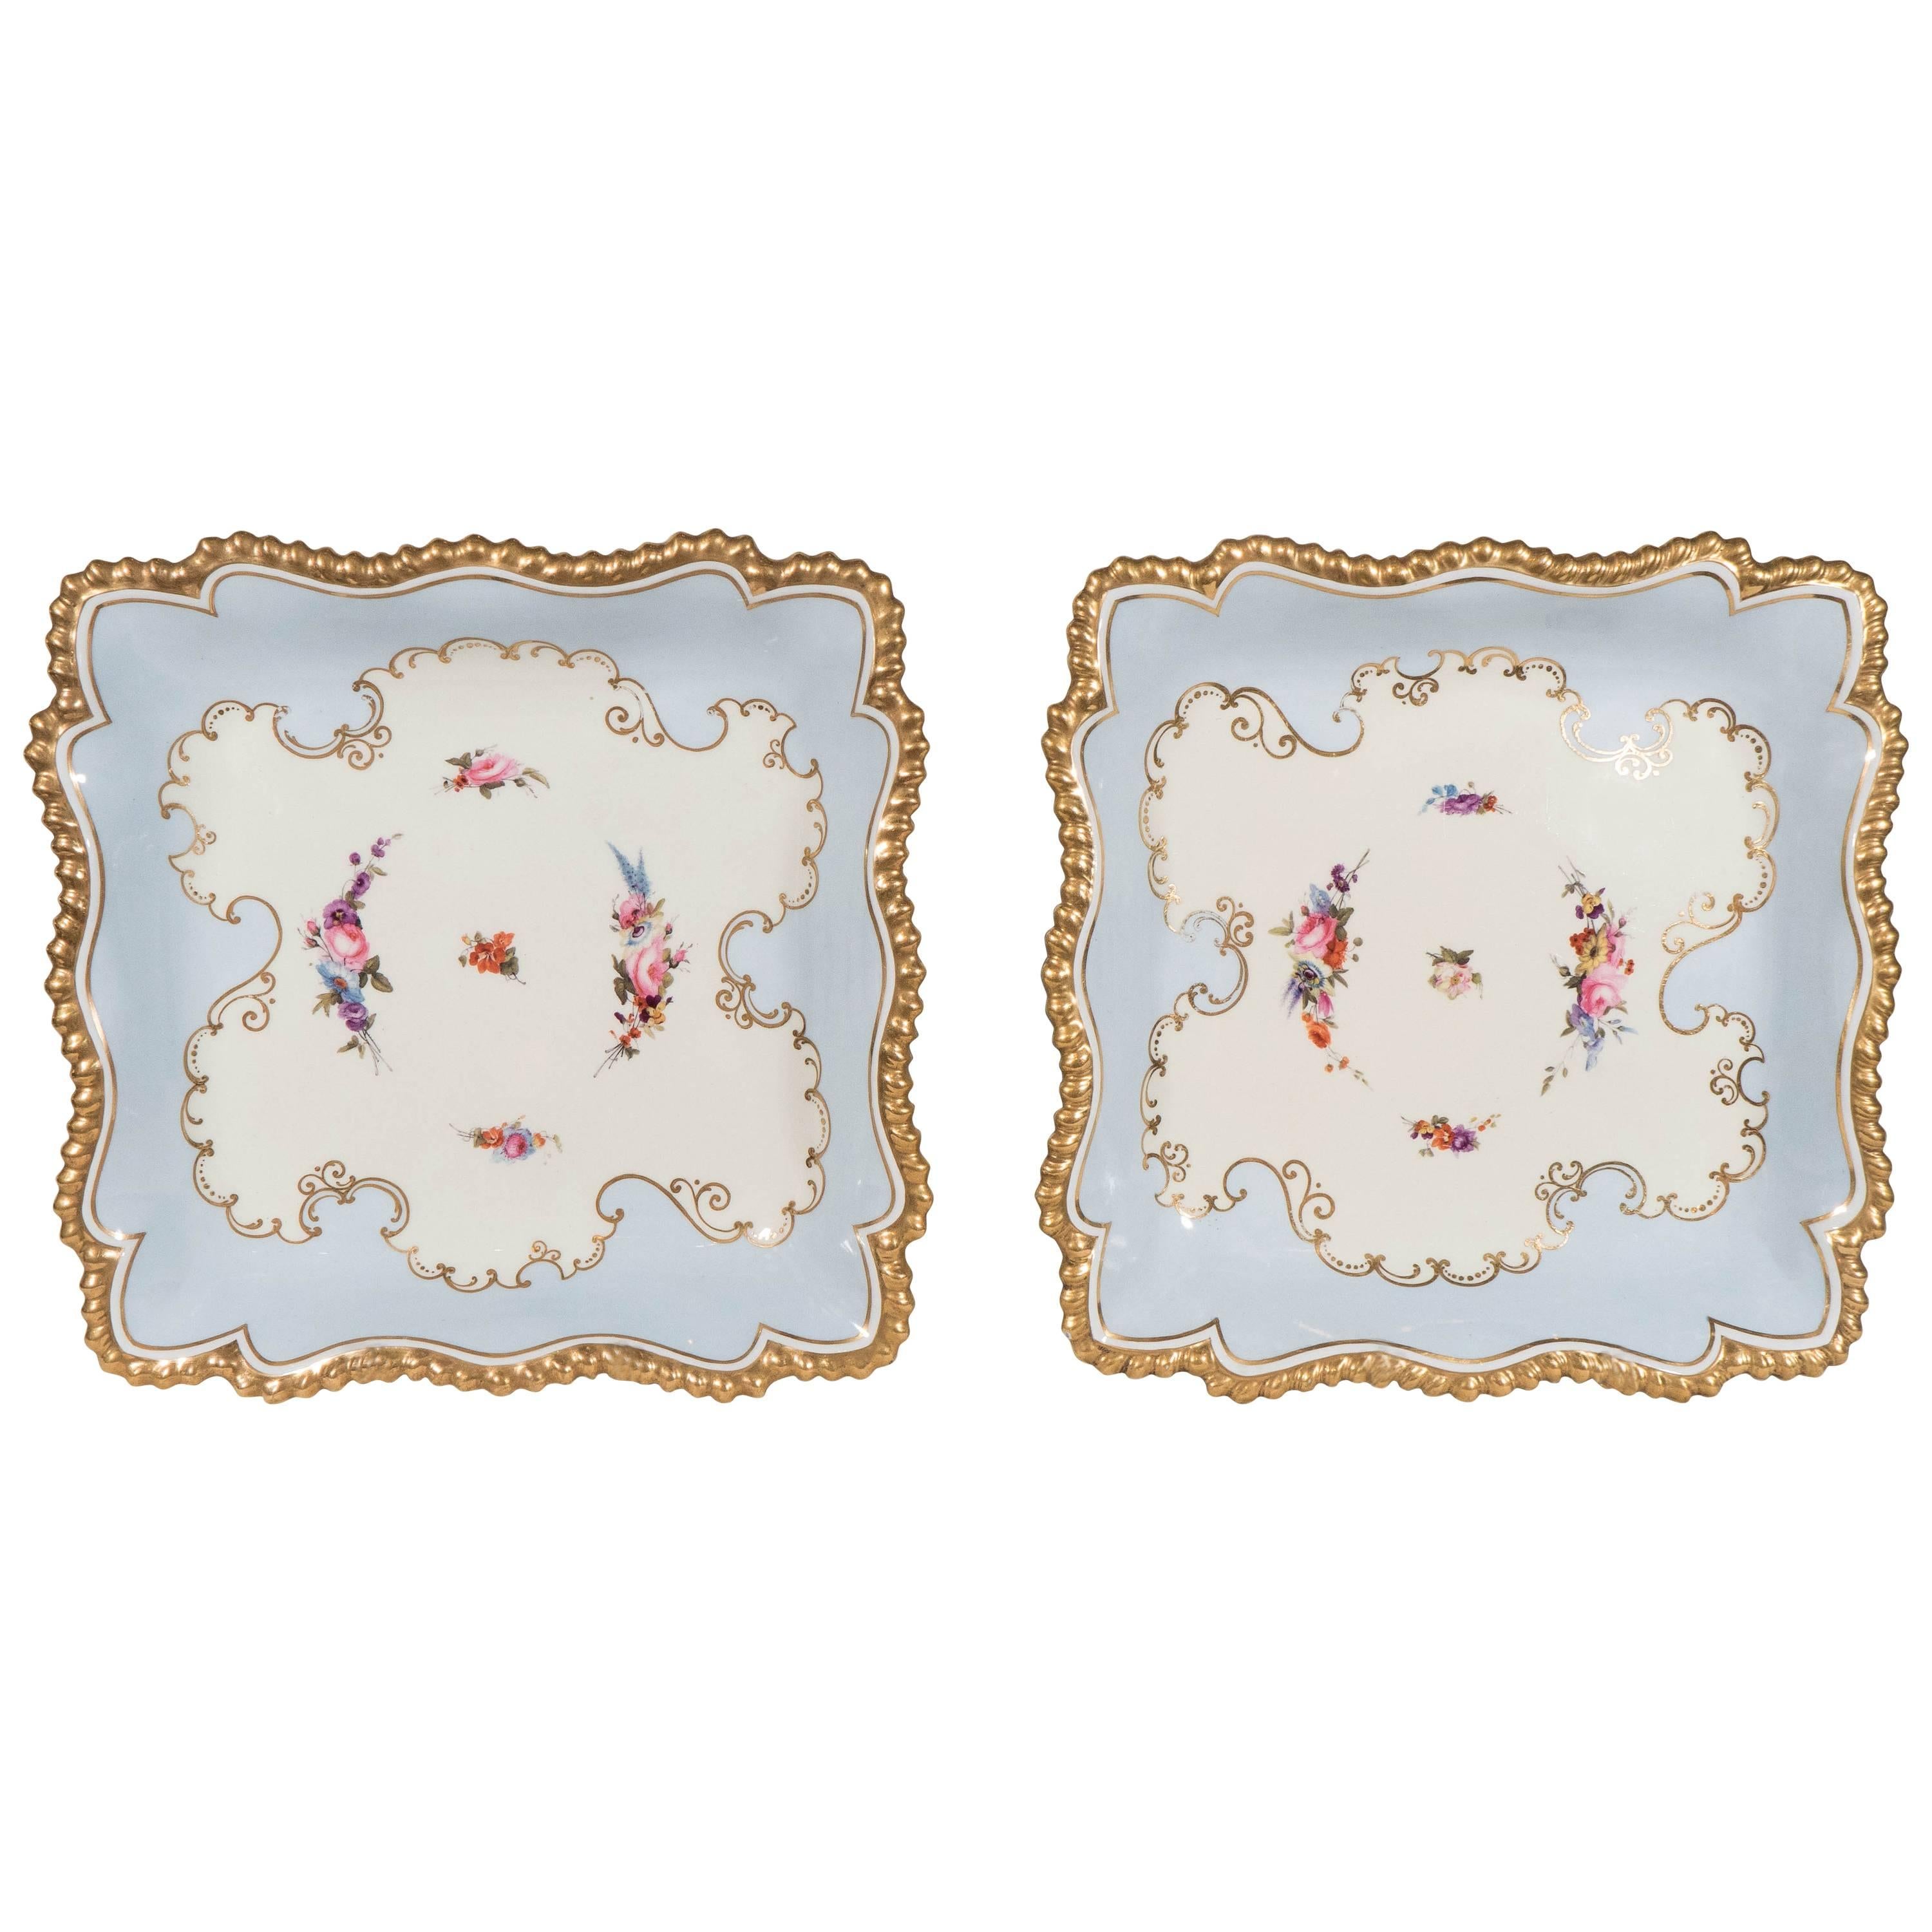 Pale Blue Worcester Porcelain Square Dishes Made in England circa 1820